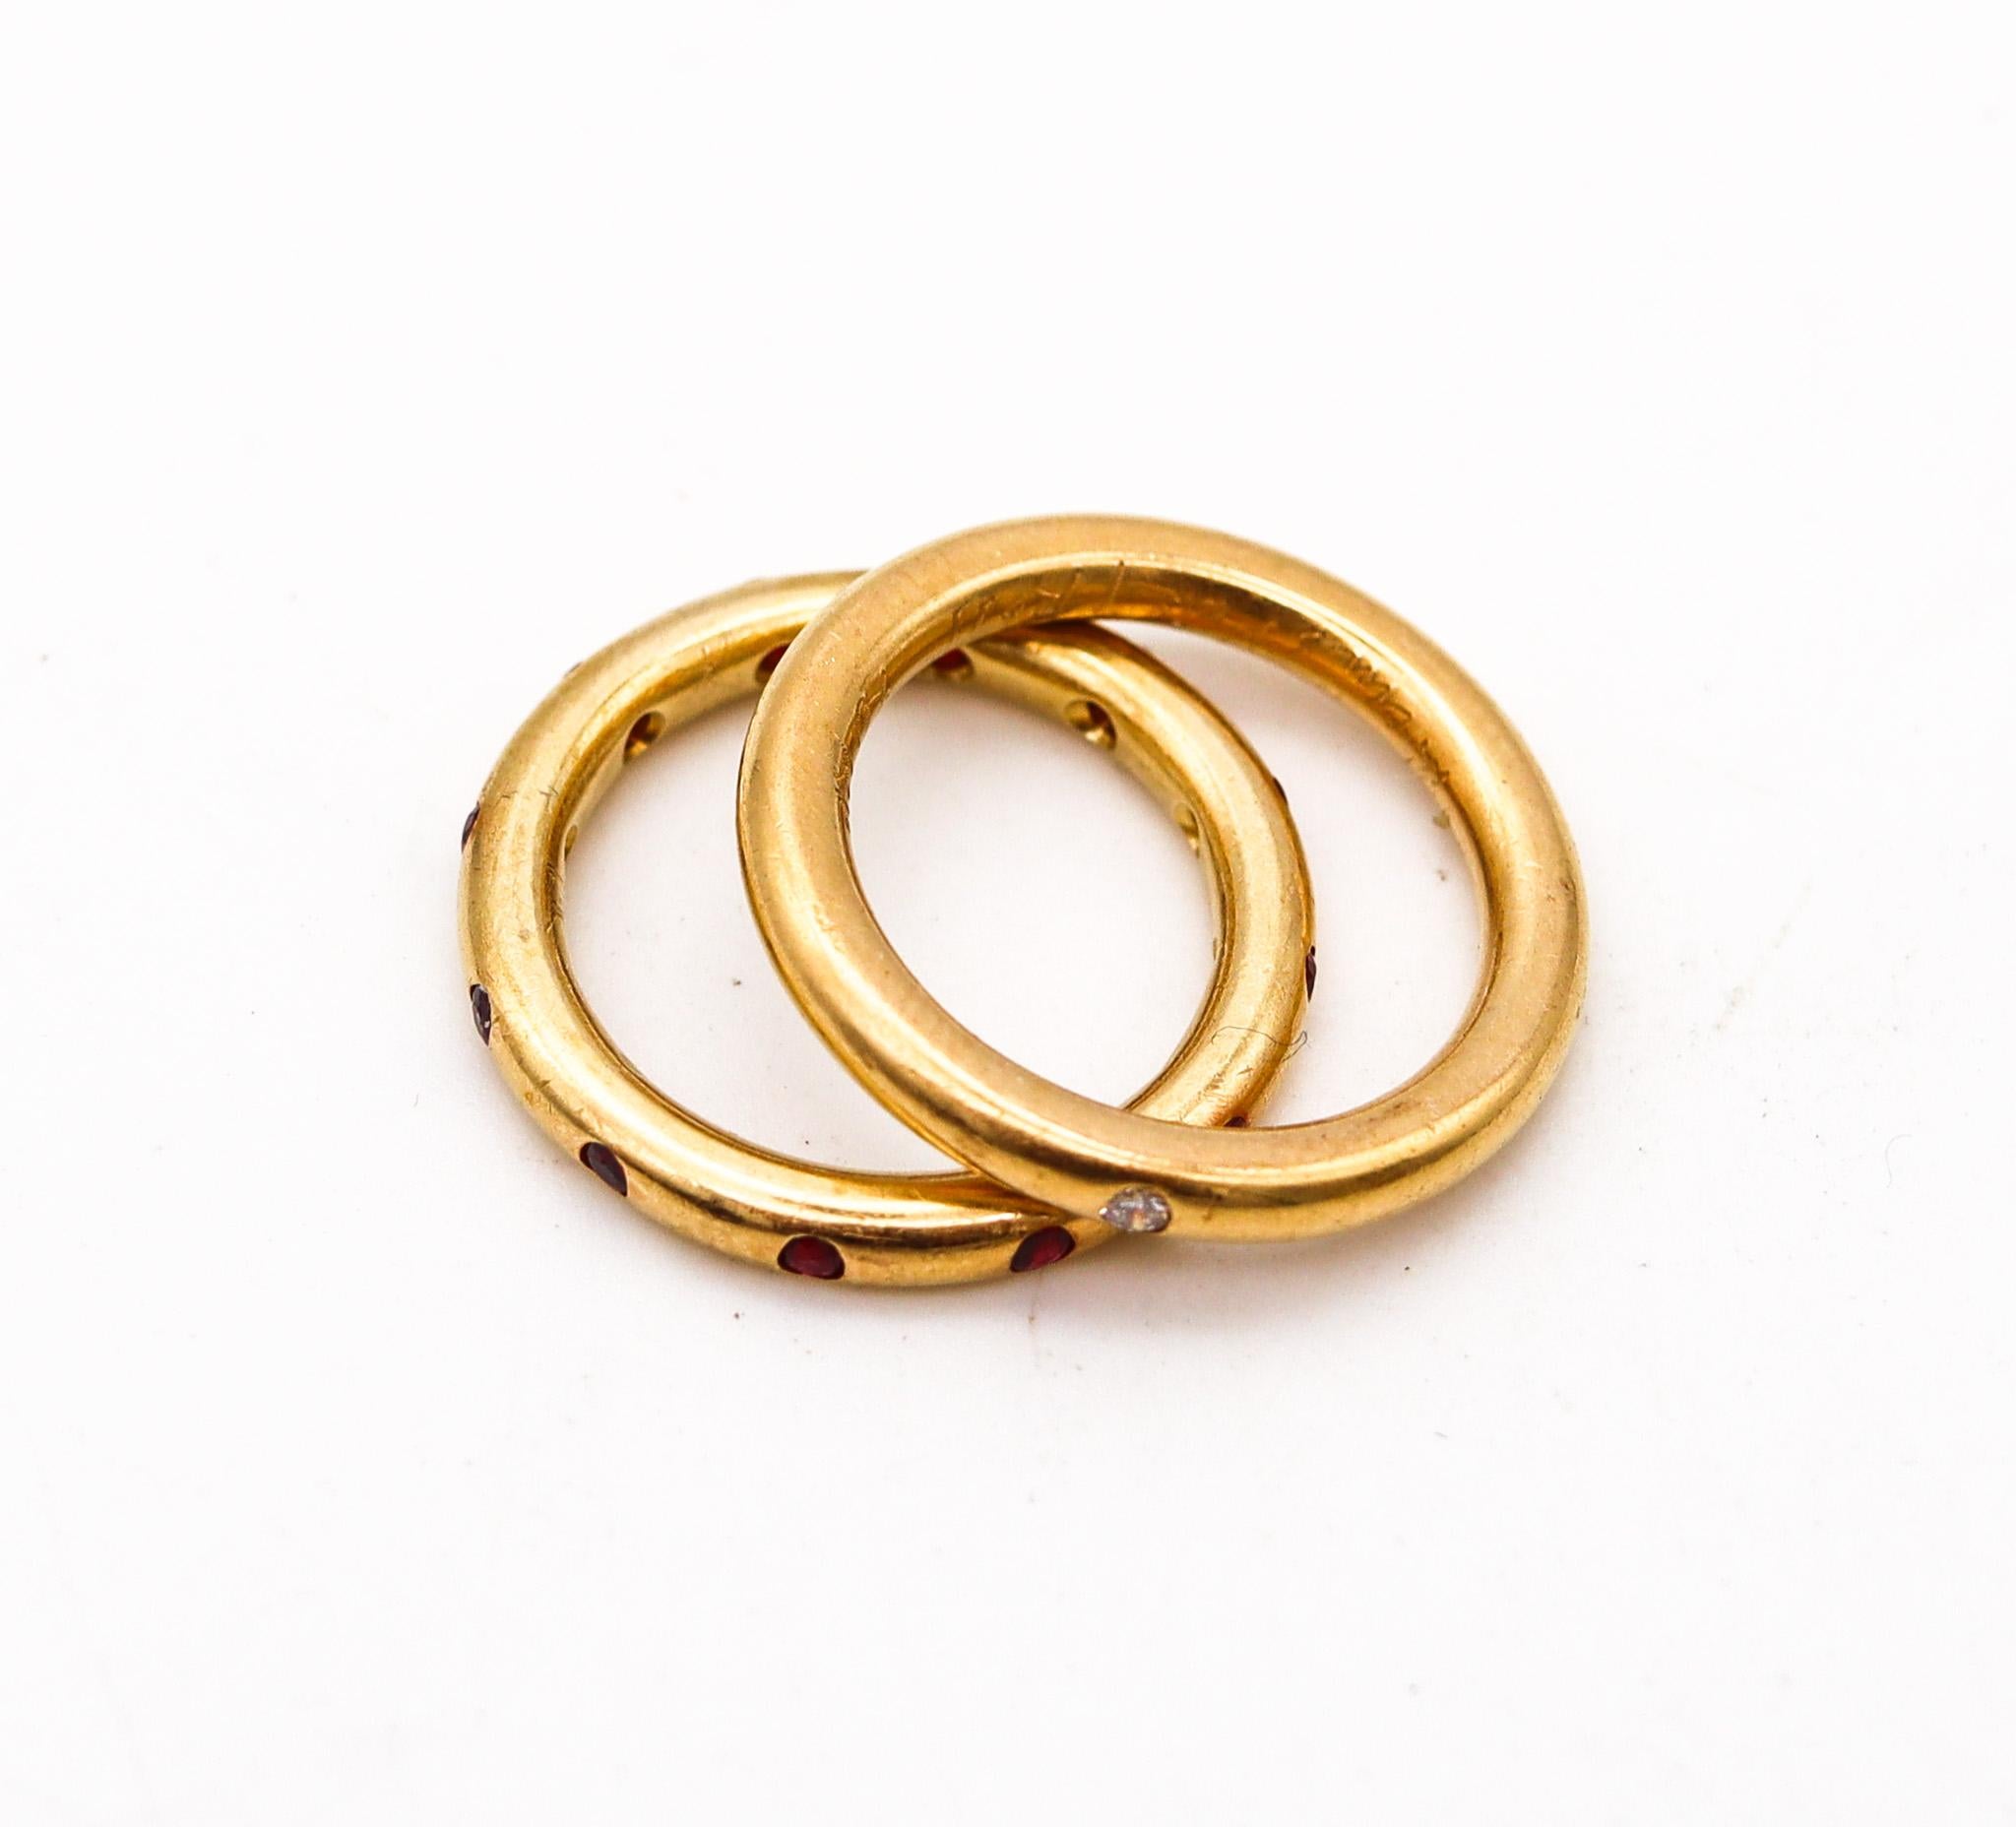 Set of eternity rings designed by Reinstein-Ross.

Very beautiful set of two eternity rings, created in New York city by the exclusive jewelry designers of Reinstein-Ross. This set has been crafted in solid rich yellow gold of 22 karats (.916/.999